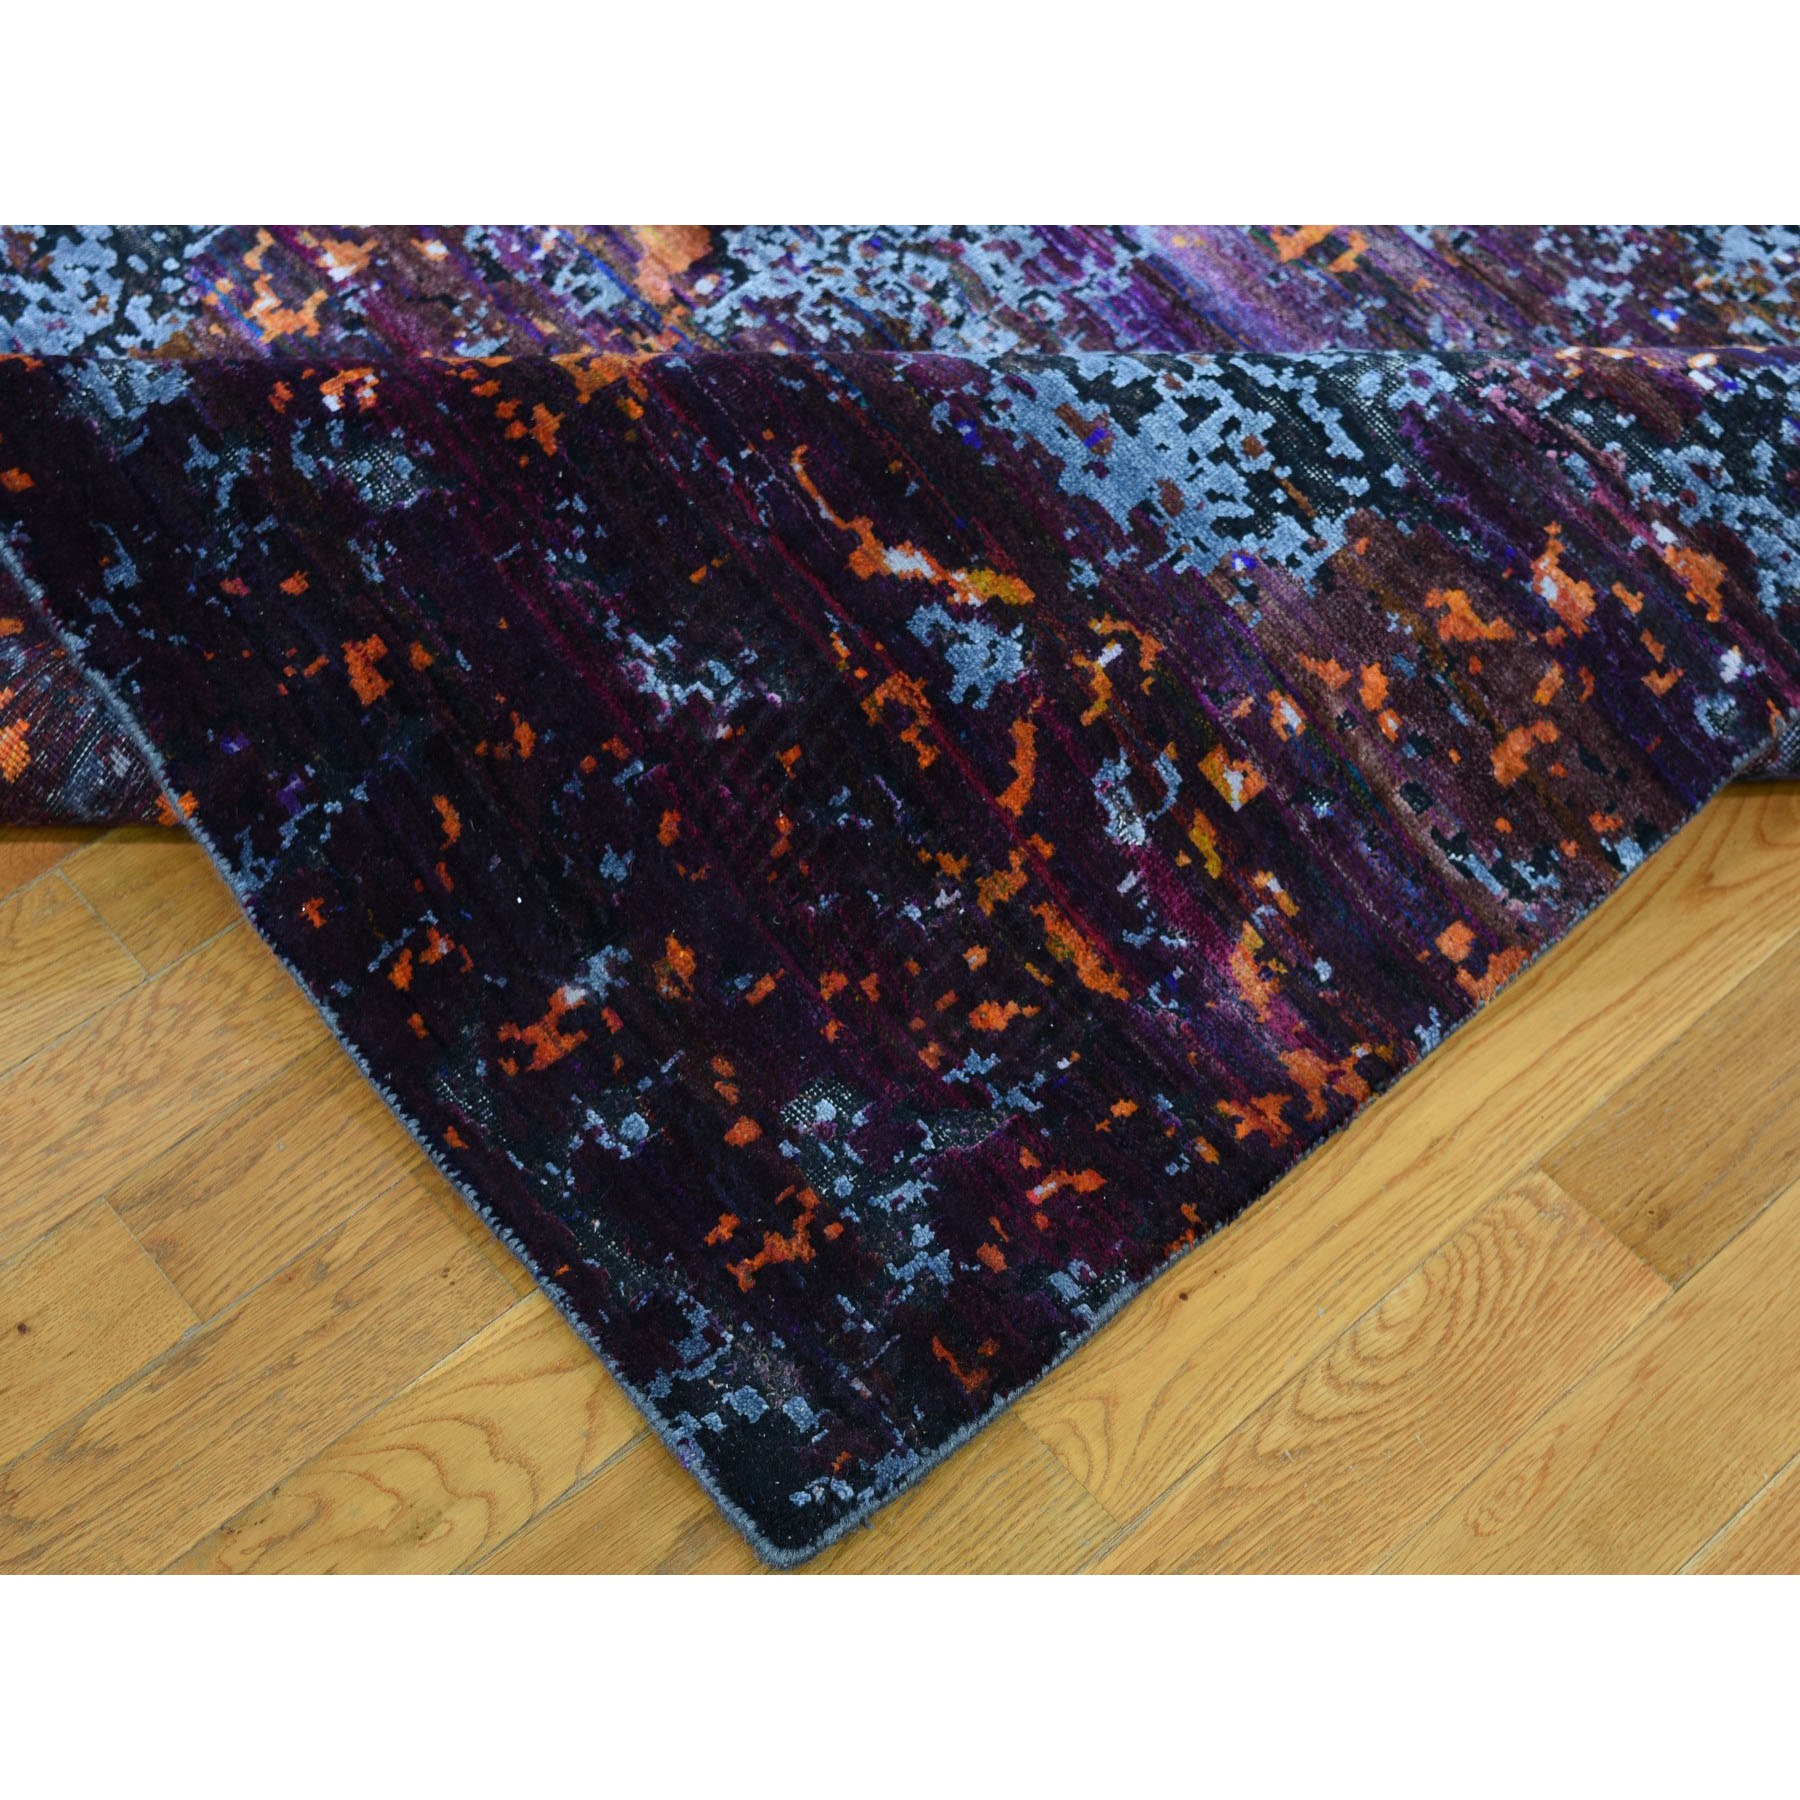 8-10 x12- Hand Knotted Blue Galactical Modern Sari Silk and Textured Pile Oriental Rug 